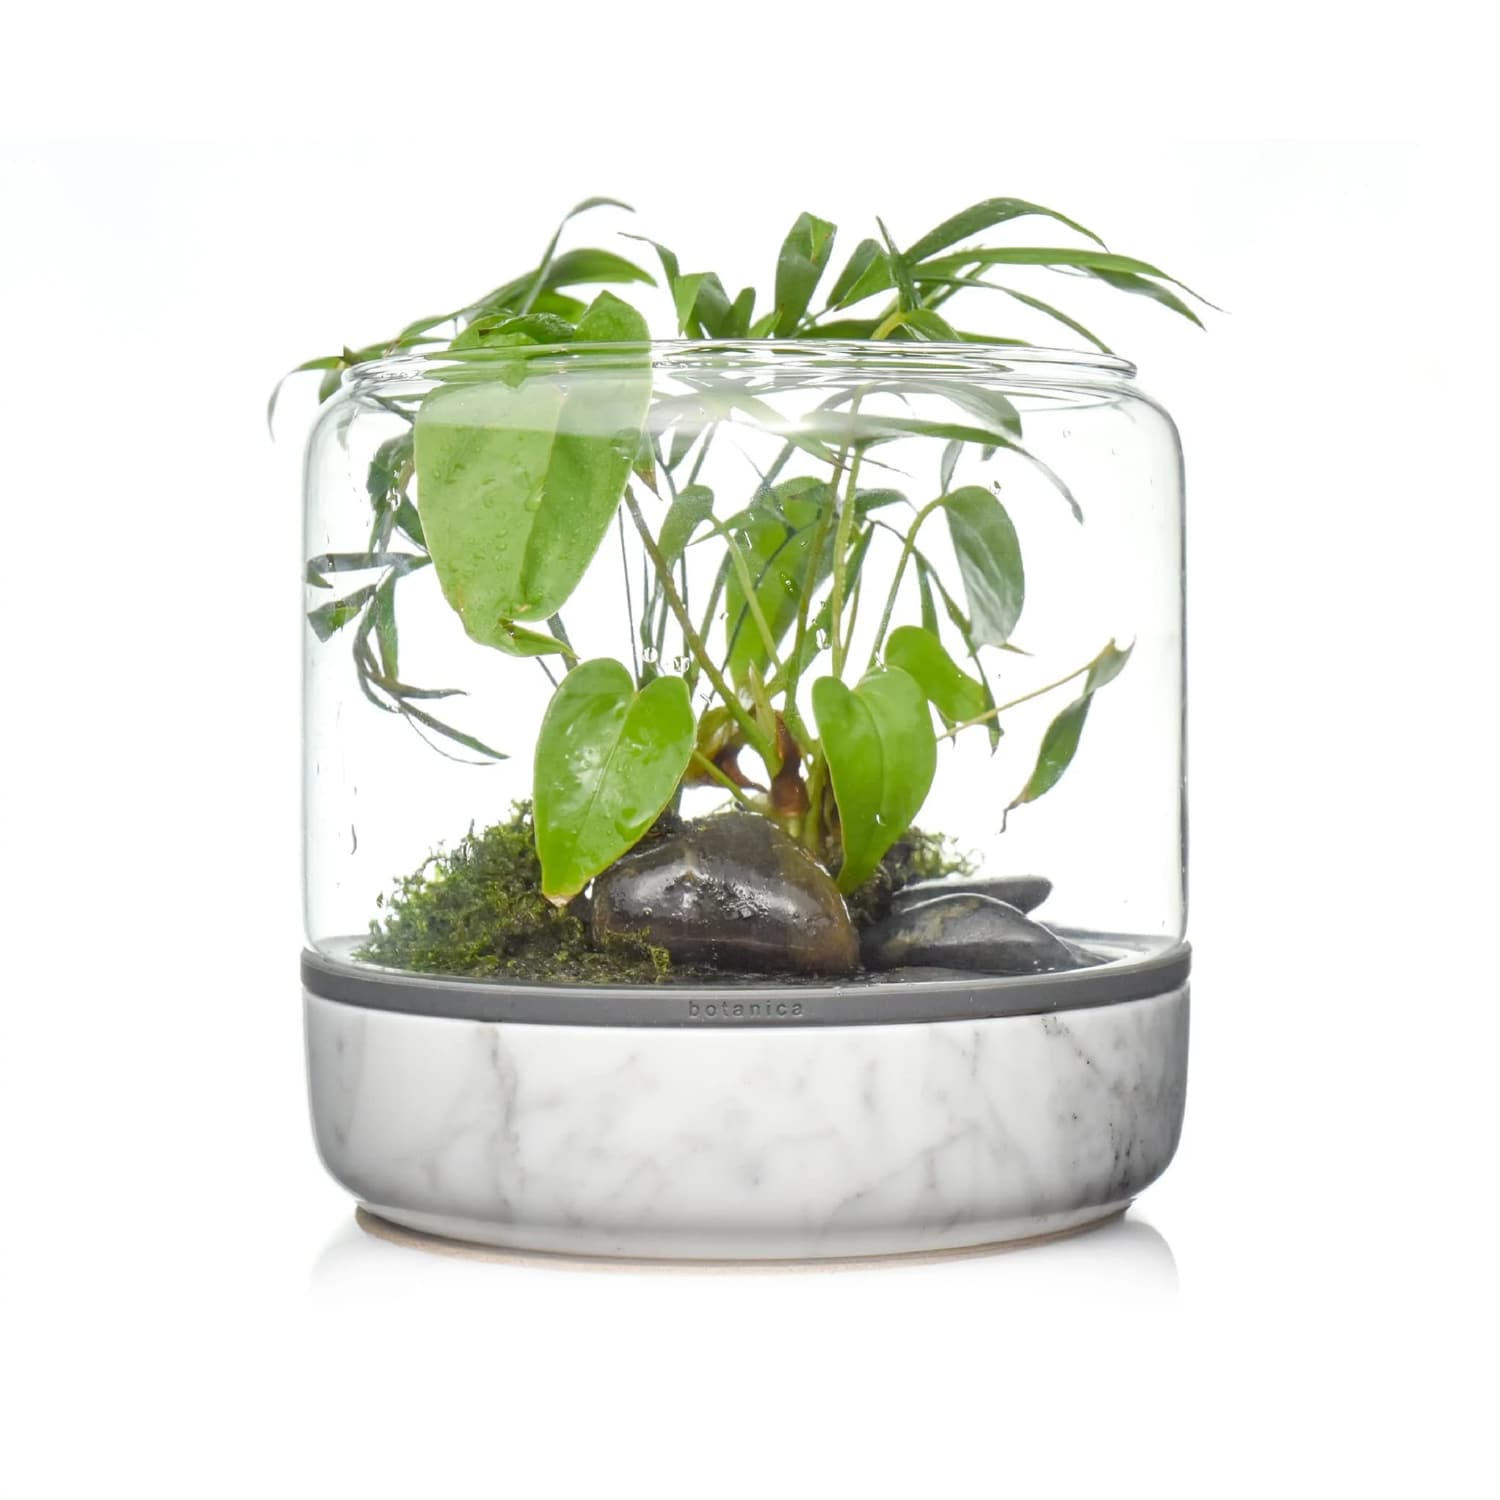 Glass Terrarium with Green Plant growing Emersed